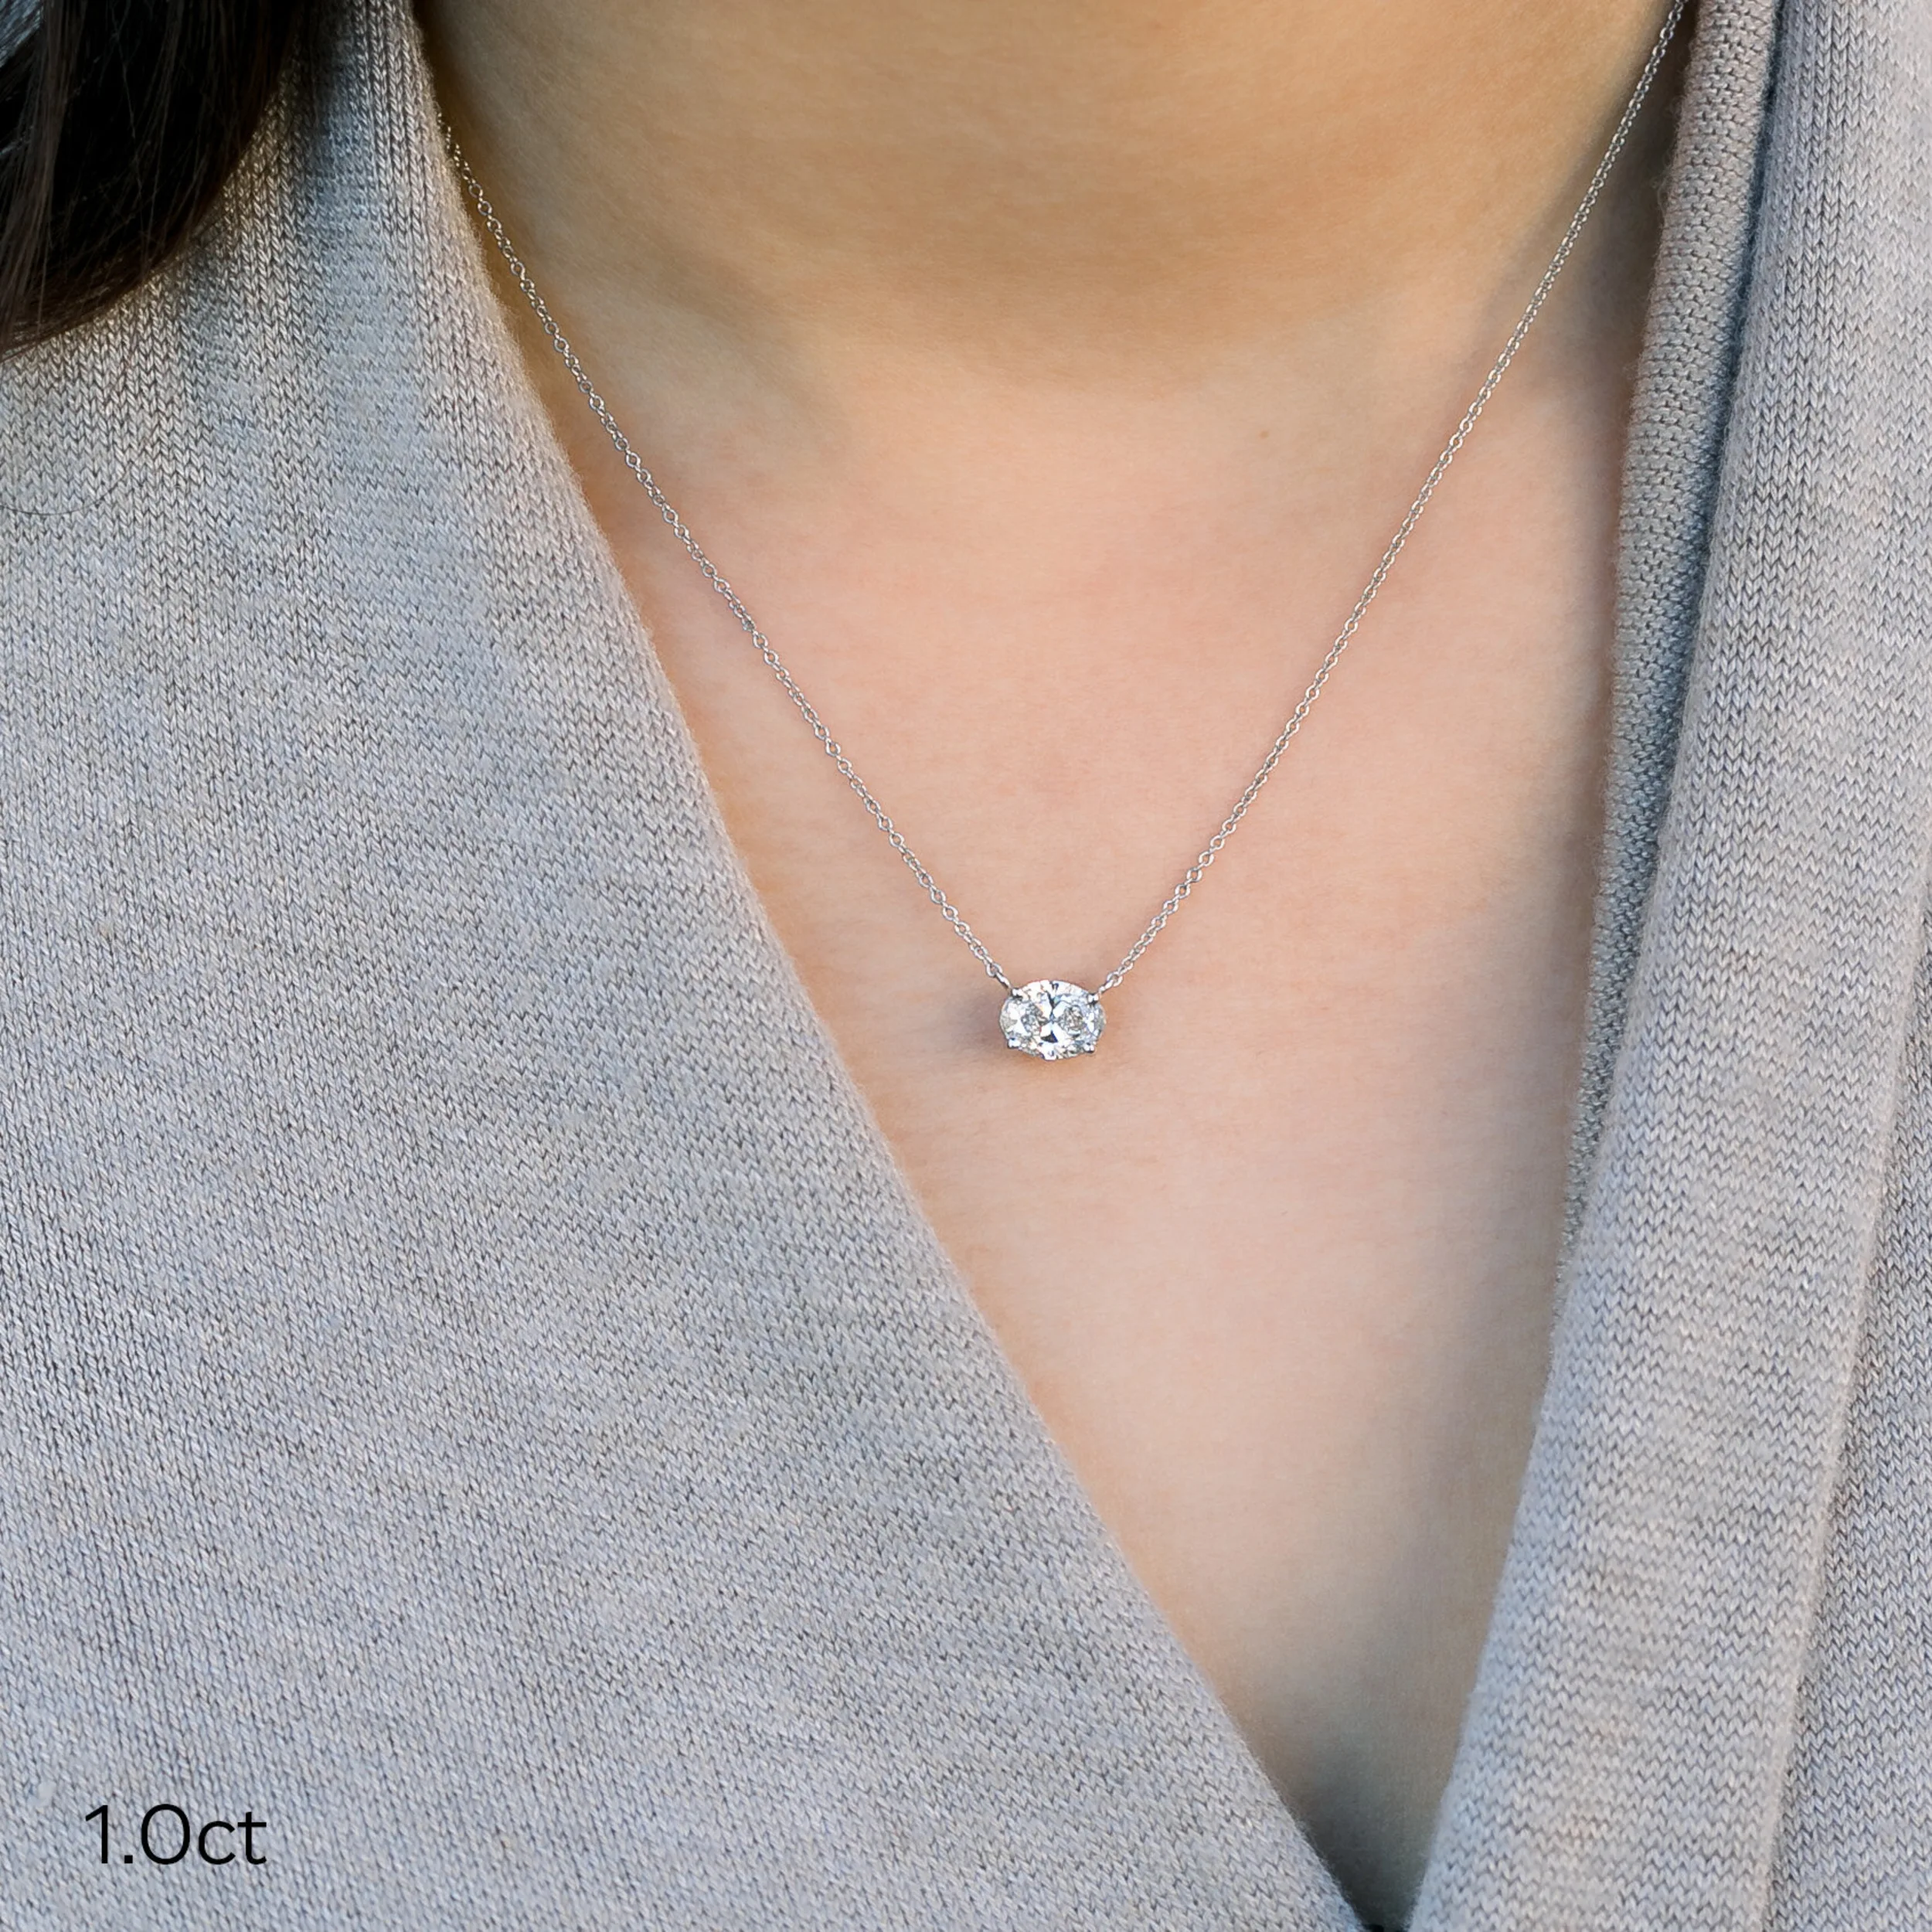 East West Oval Pendant Necklace made with lab grown diamonds in white gold ADA Diamonds ad design 297